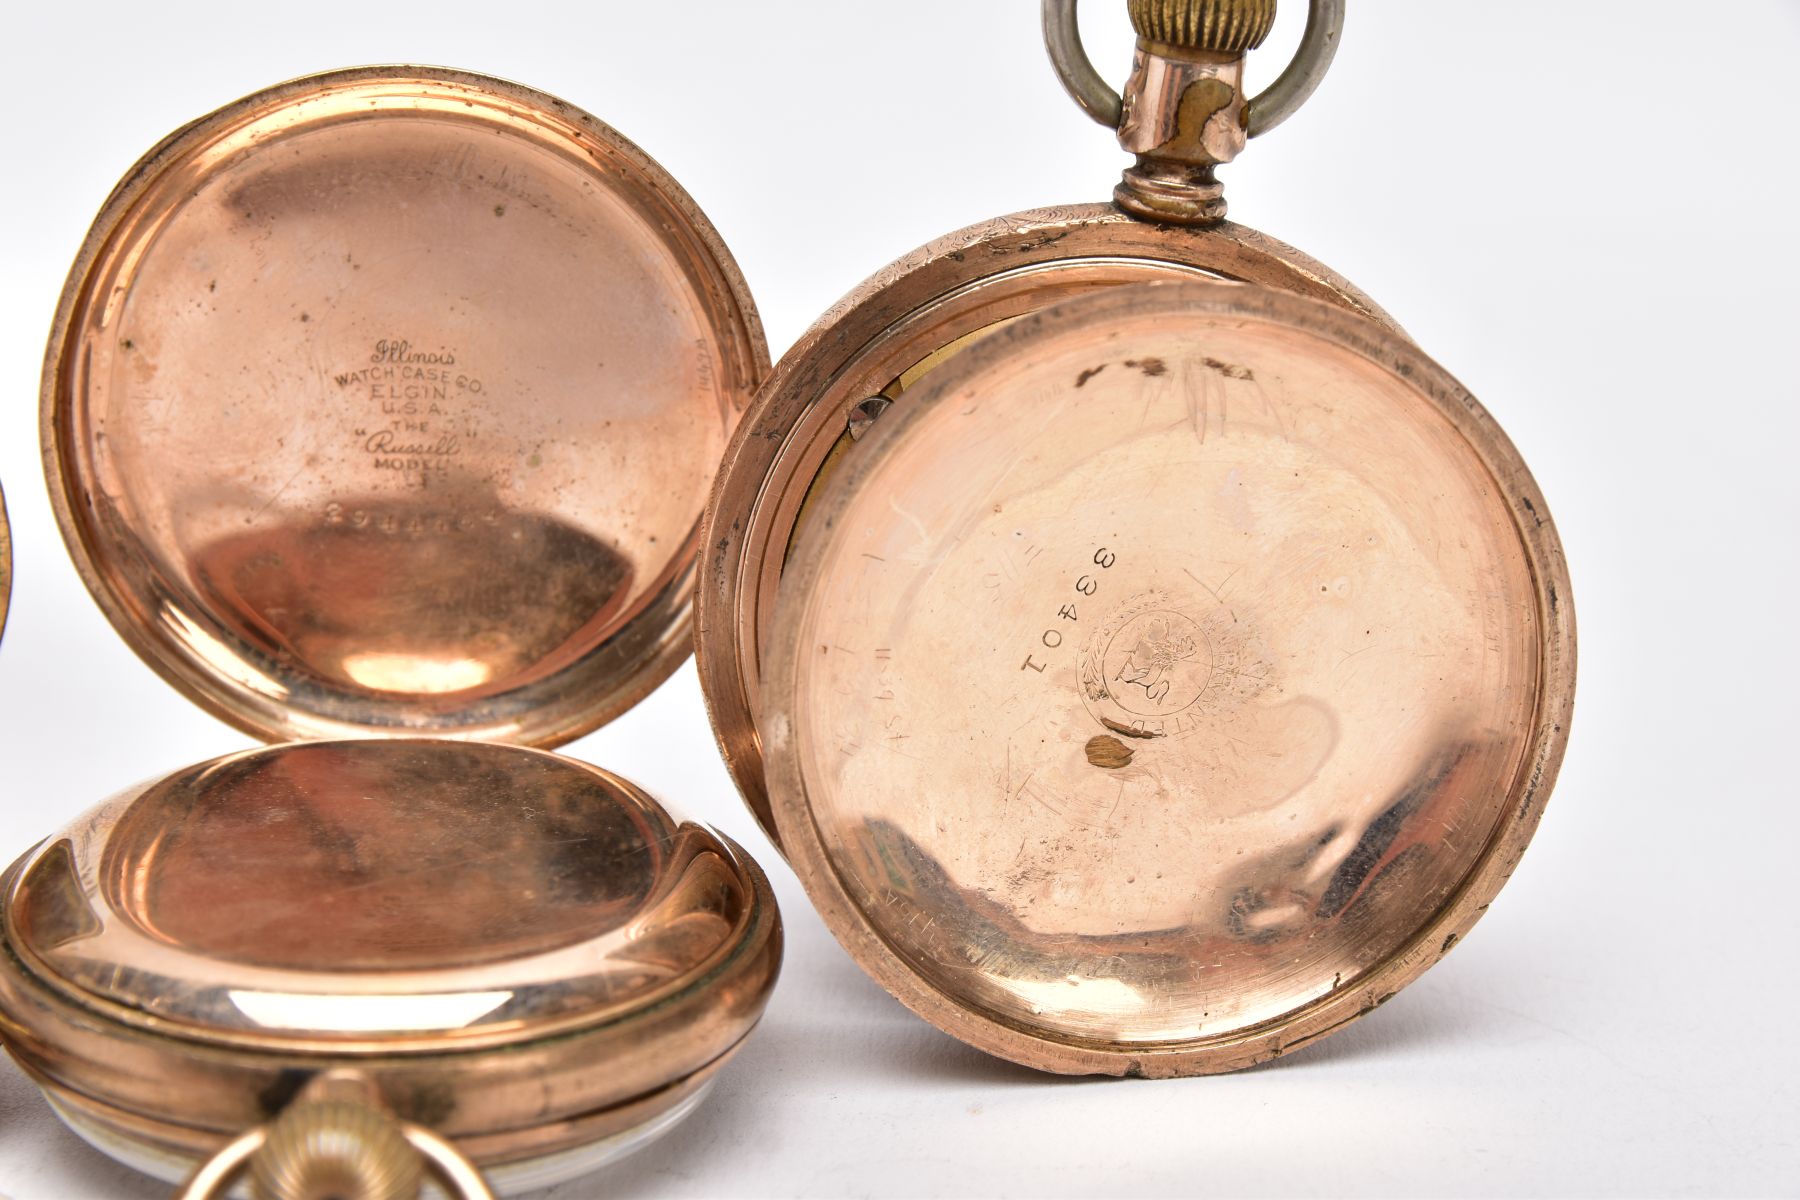 THREE GOLD PLATED OPEN FACED POCKET WATCHES, the first with a white dial signed 'Eros', Arabic - Image 5 of 8